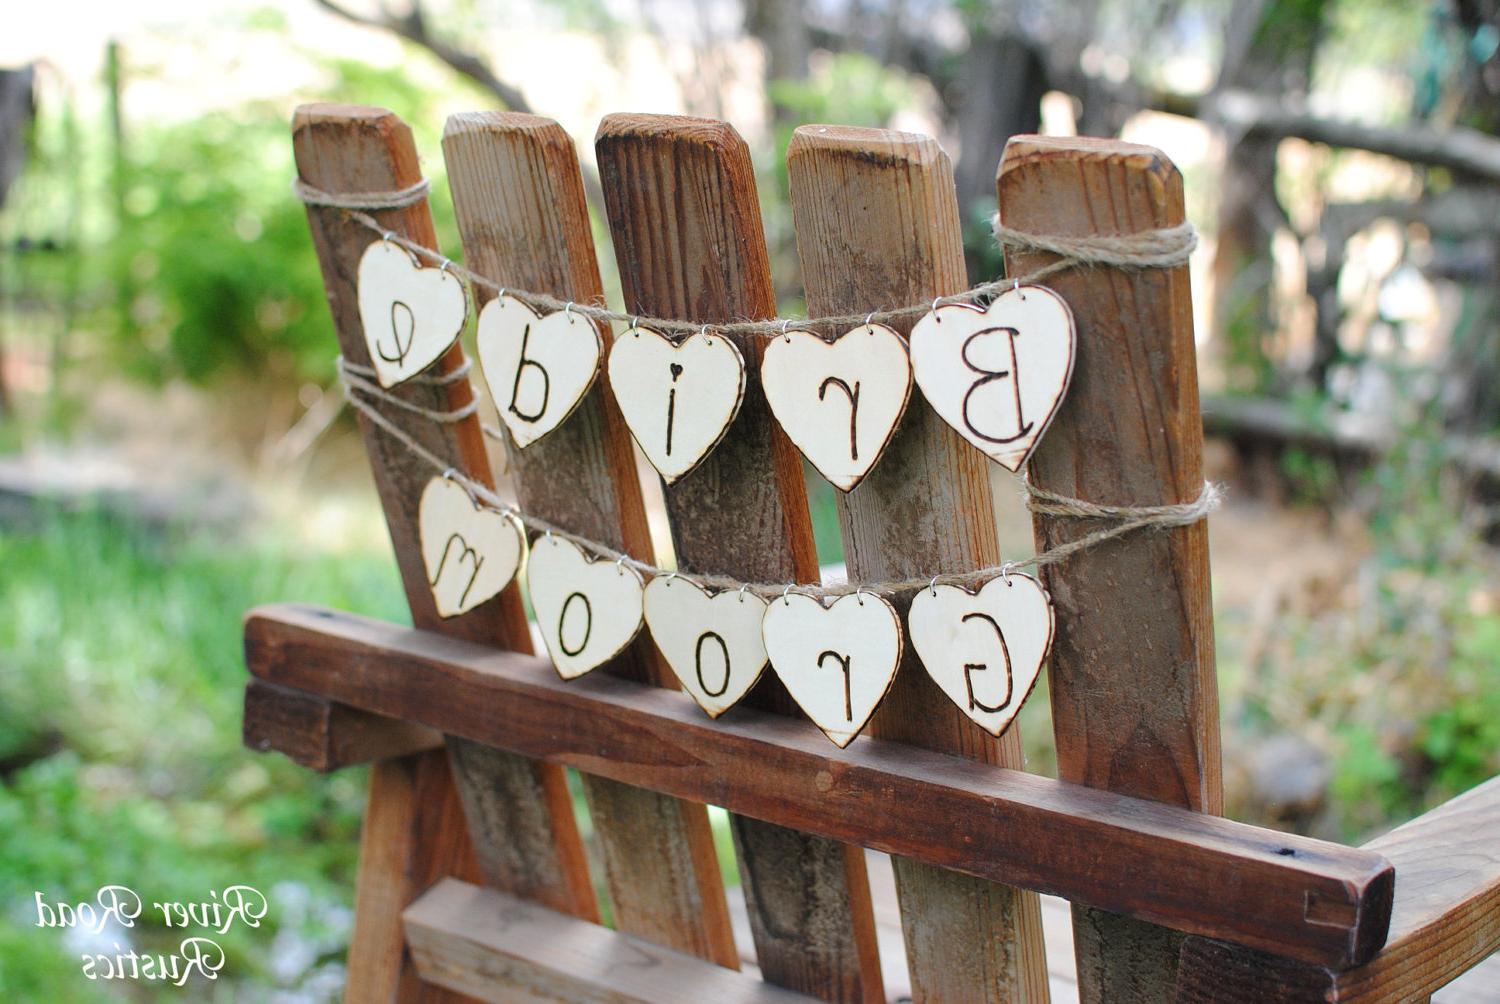 Wedding Bride & Groom Wood Heart Banners - Chair Signs or Photo Props.